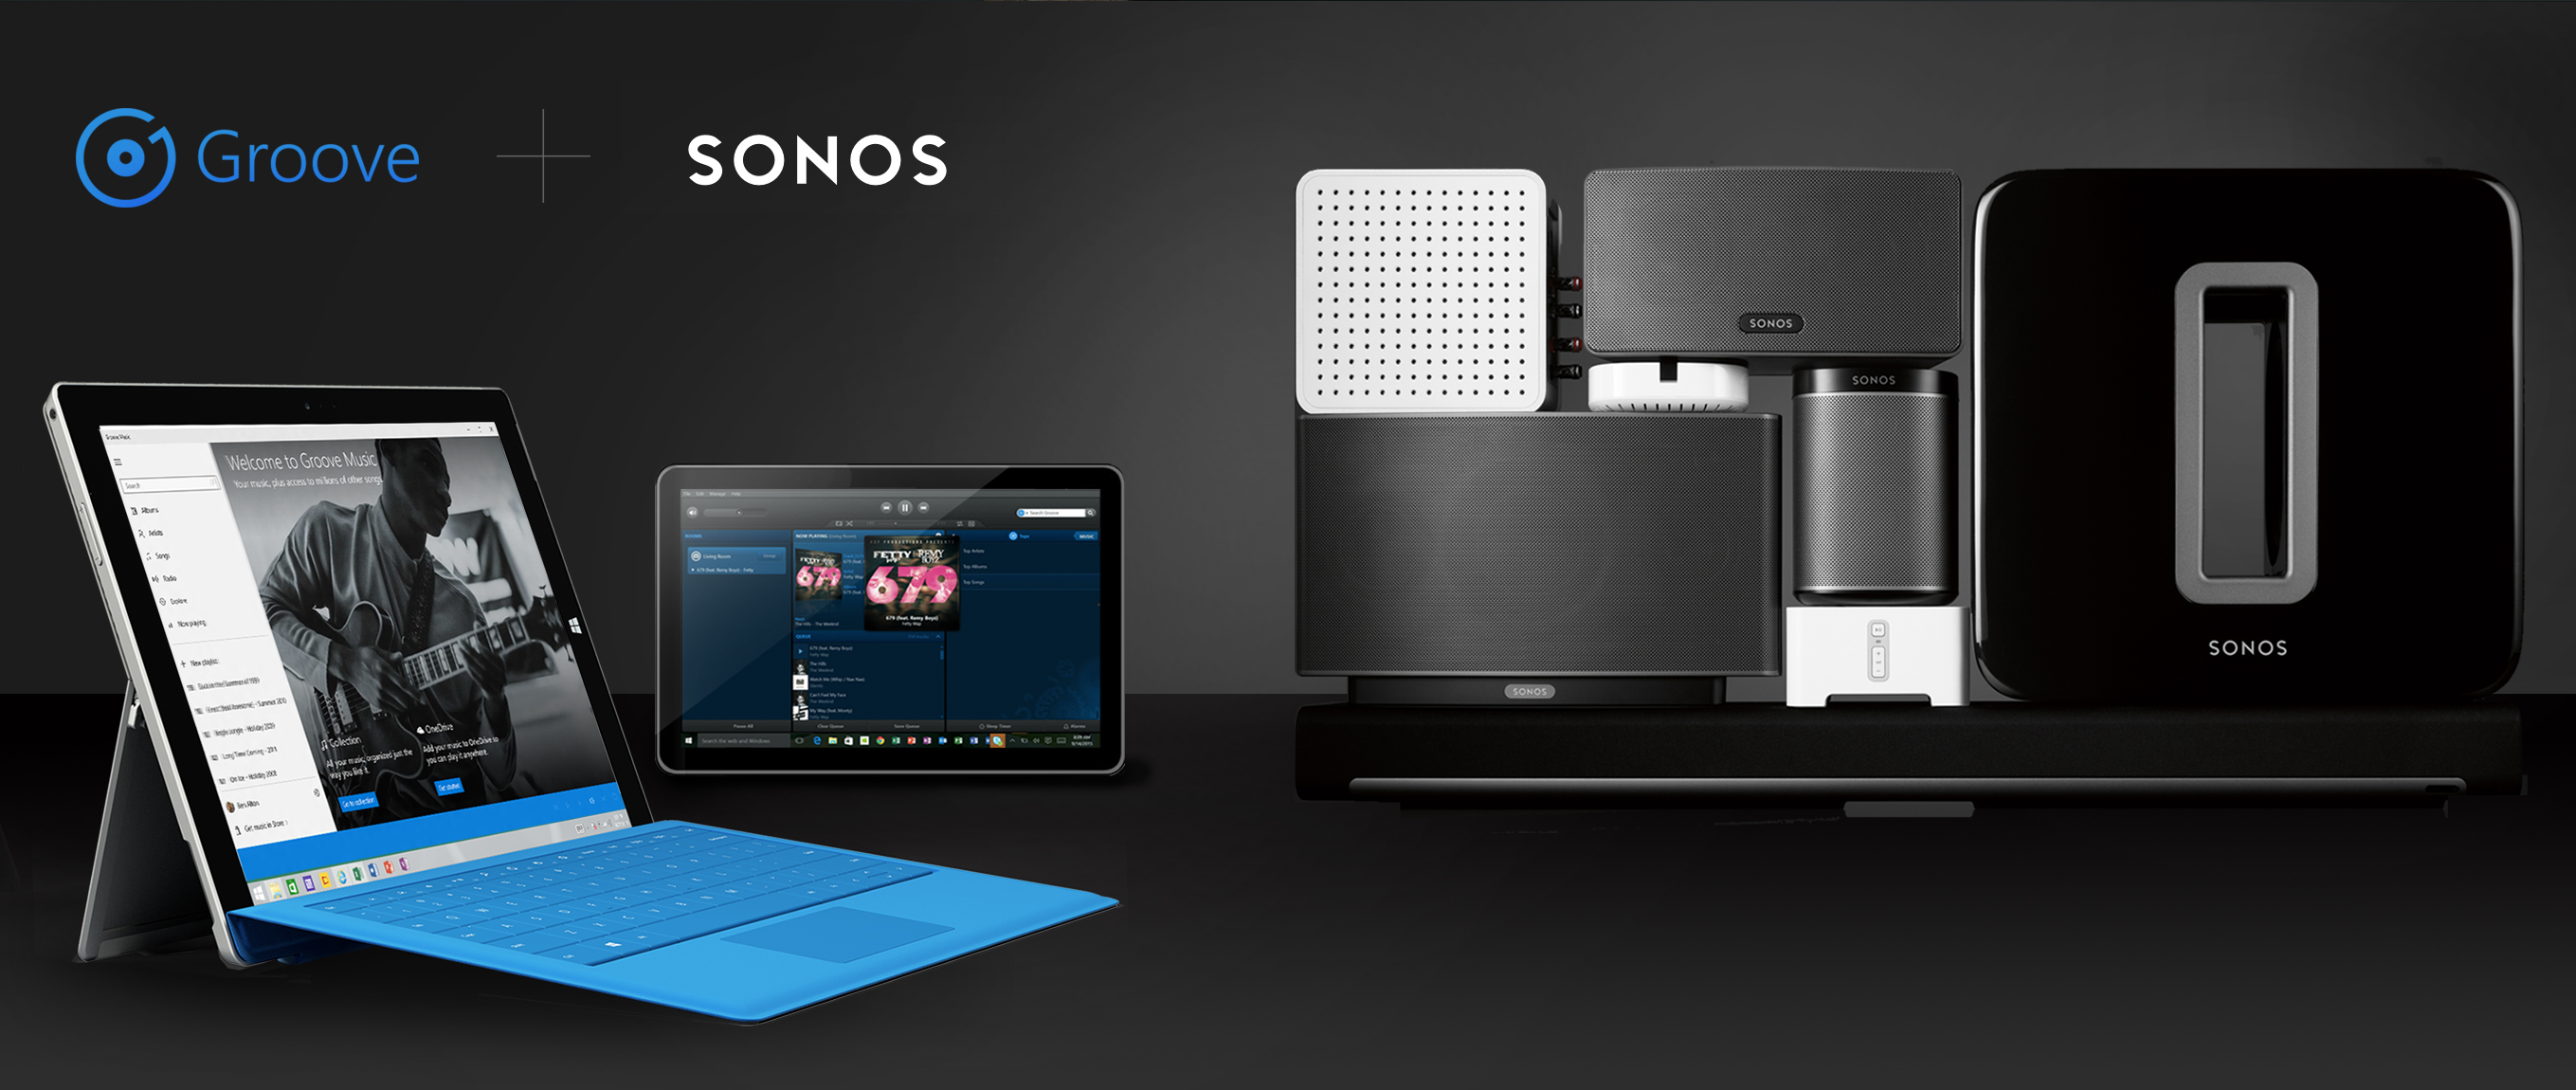 Tag det op overgive Mistillid Groove Music Support for Sonos is Here | Windows Experience Blog